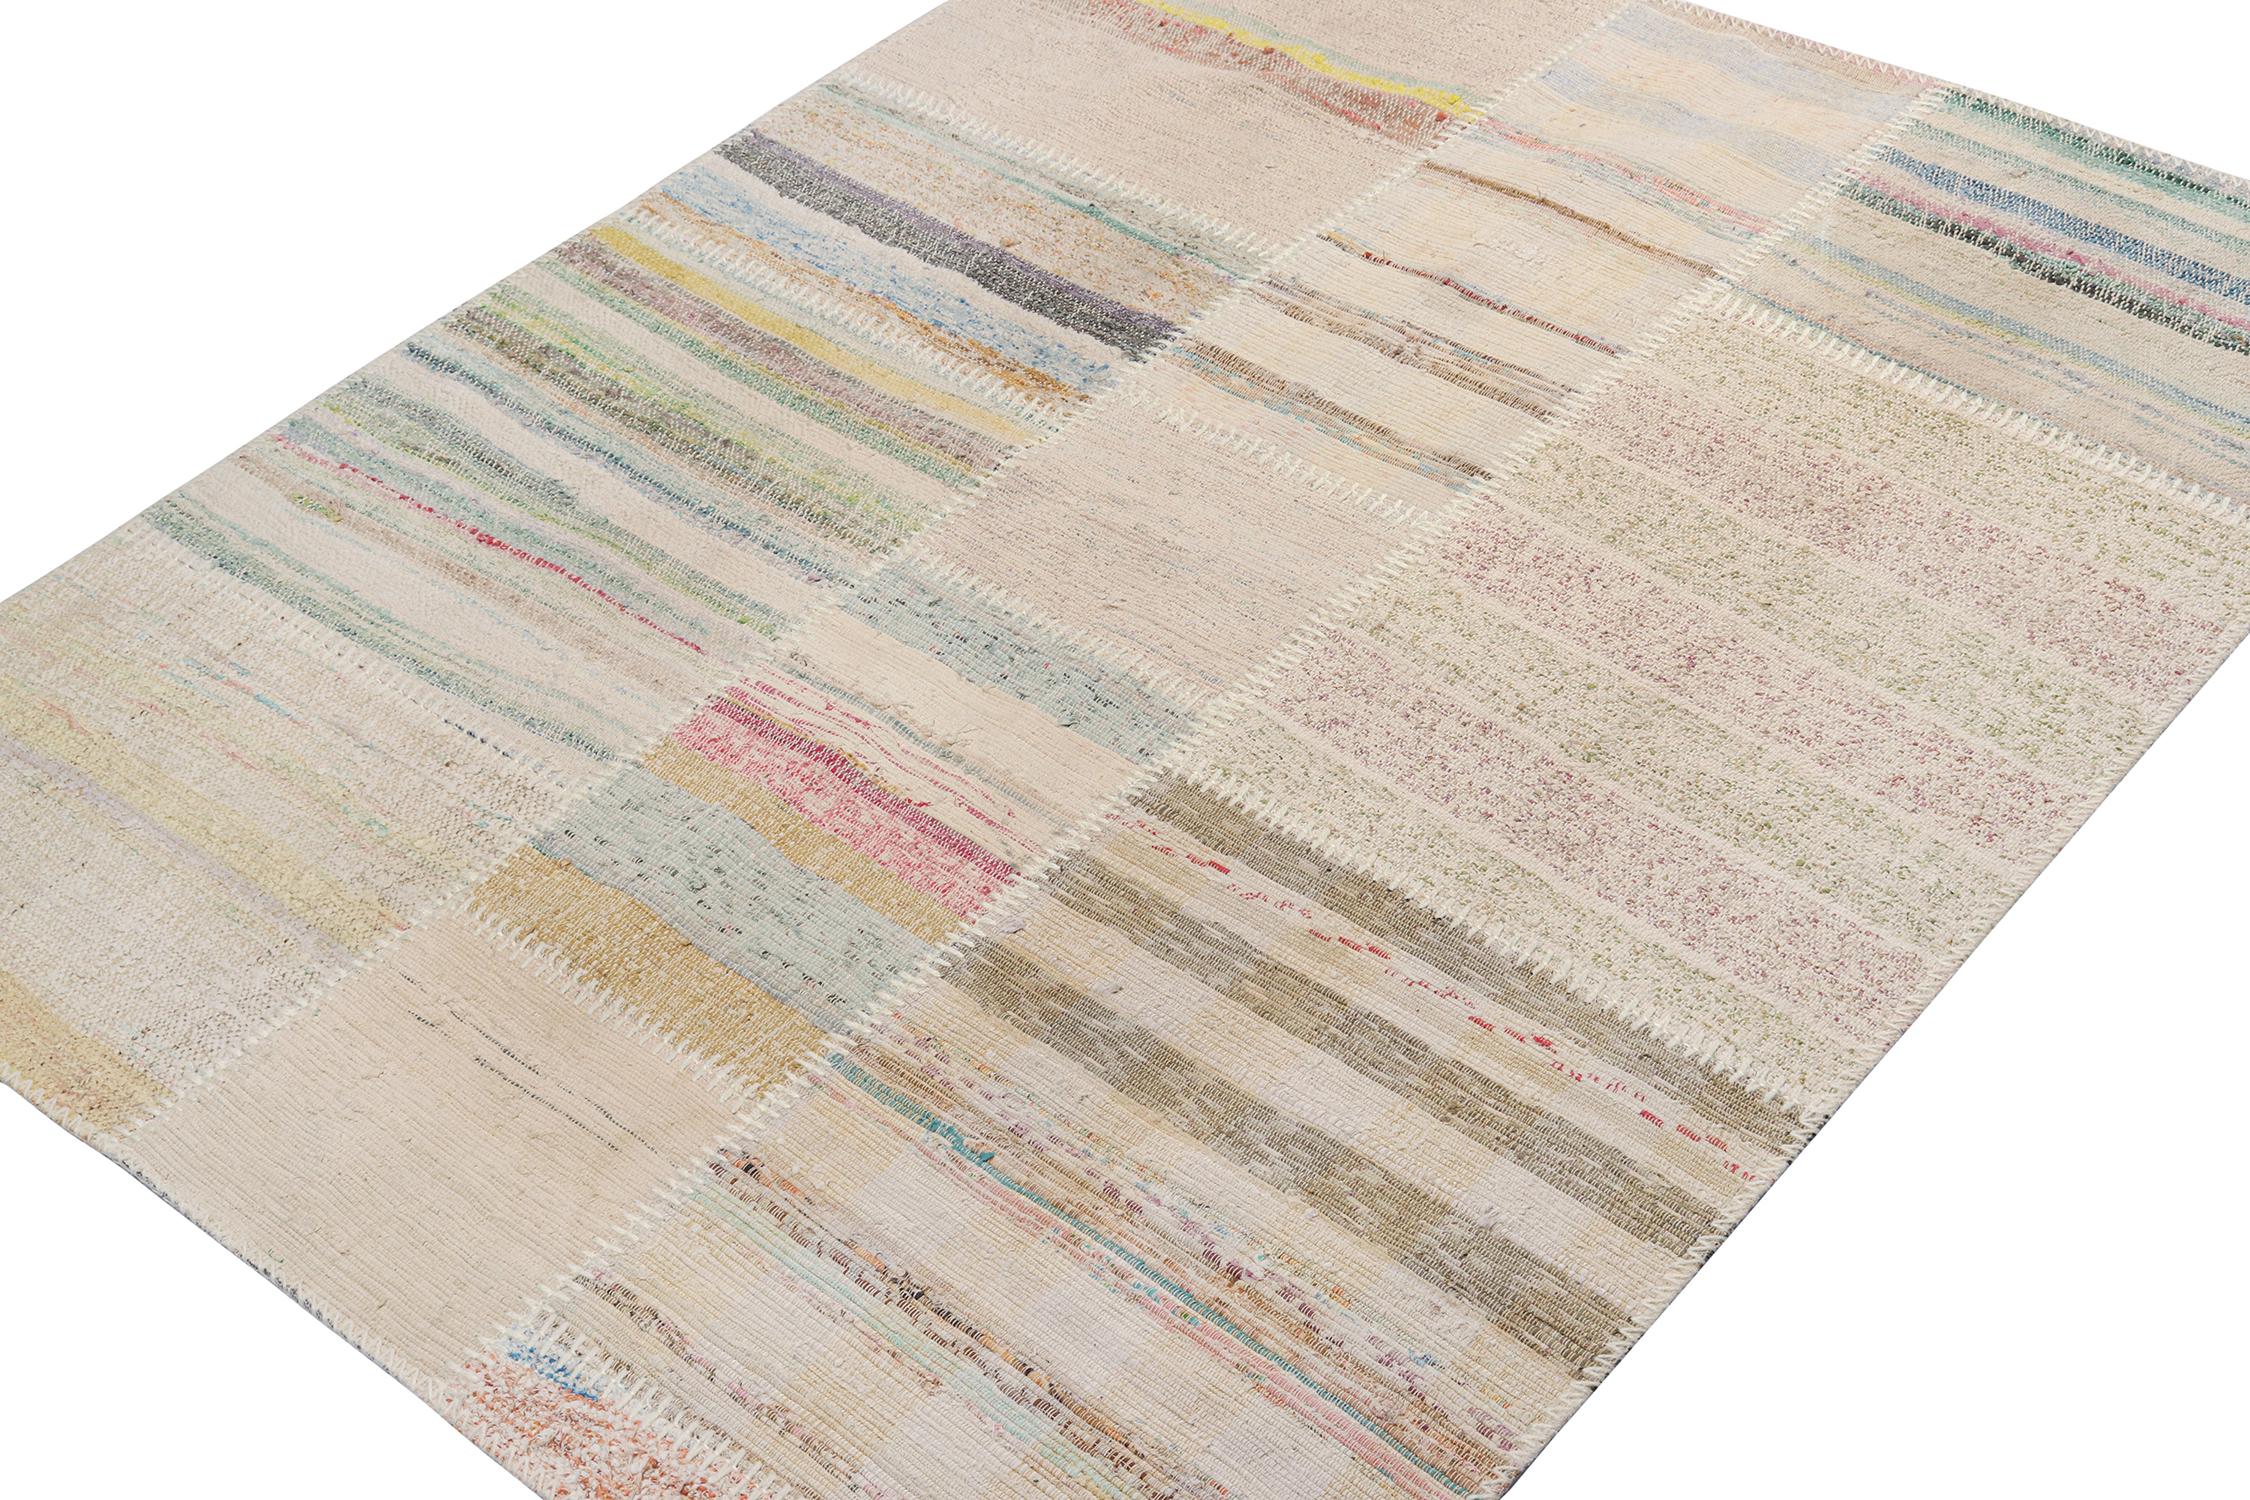 Rug & Kilim presents a contemporary 4x5 rug from their innovative new patchwork kilim collection. 

On the Design: 

This flat weave technique repurposes vintage yarns in polychromatic stripes and striae, achieving a playful look with fabulous